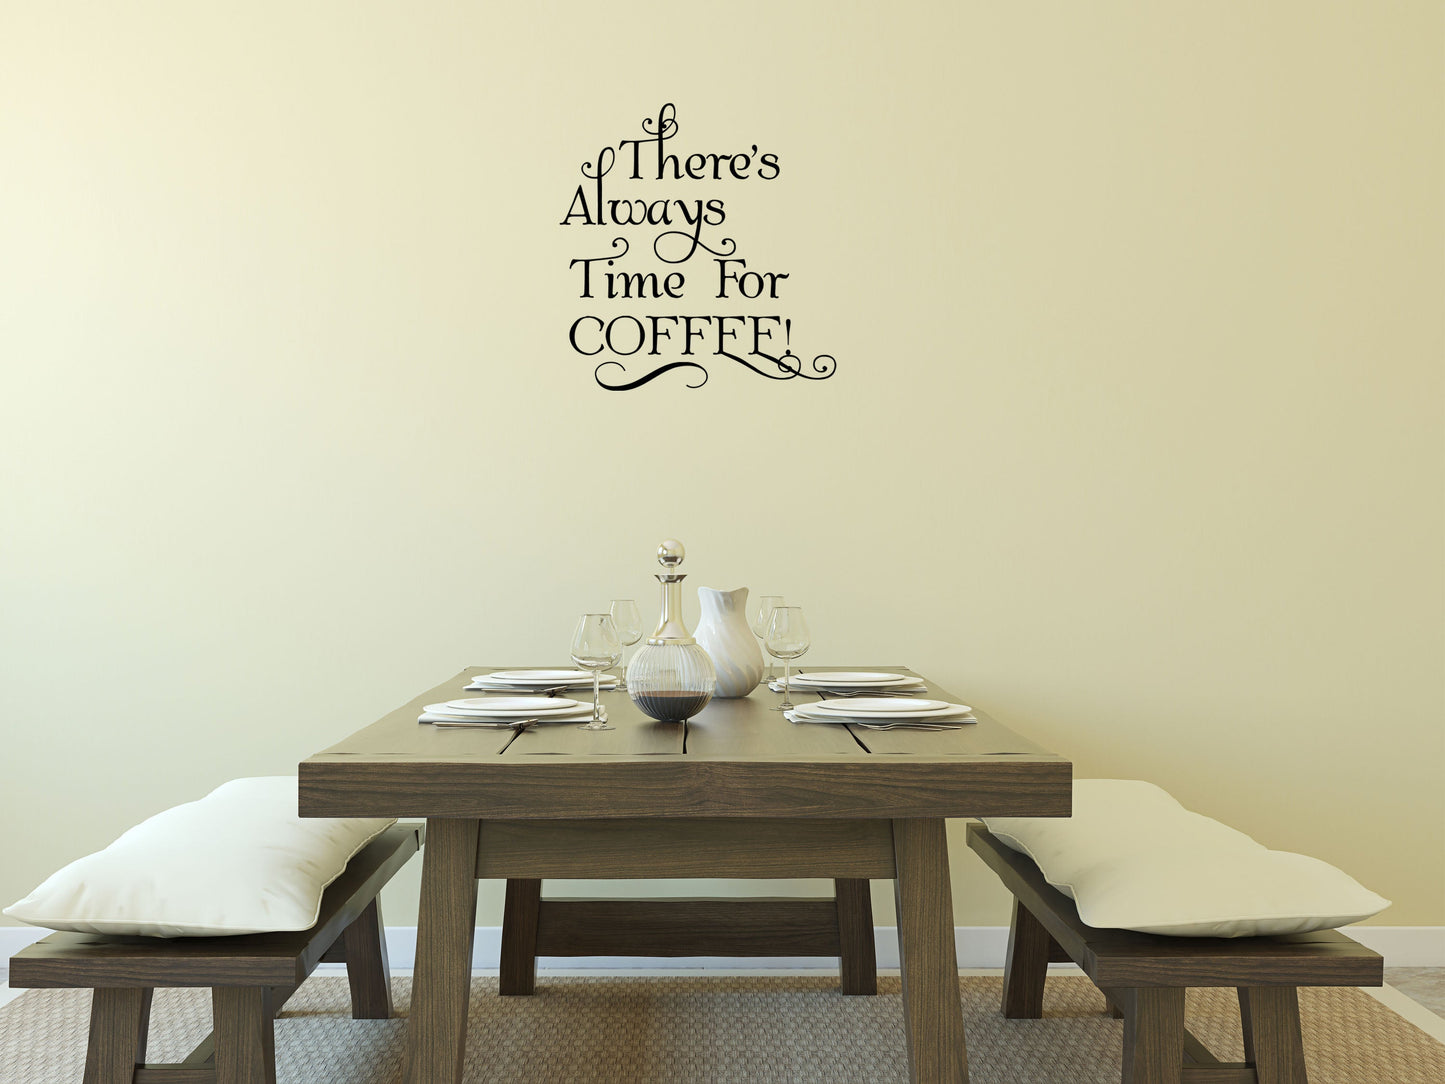 There's Always Time For Coffee Vinyl Wall Decal Inspirational Wall Signs 